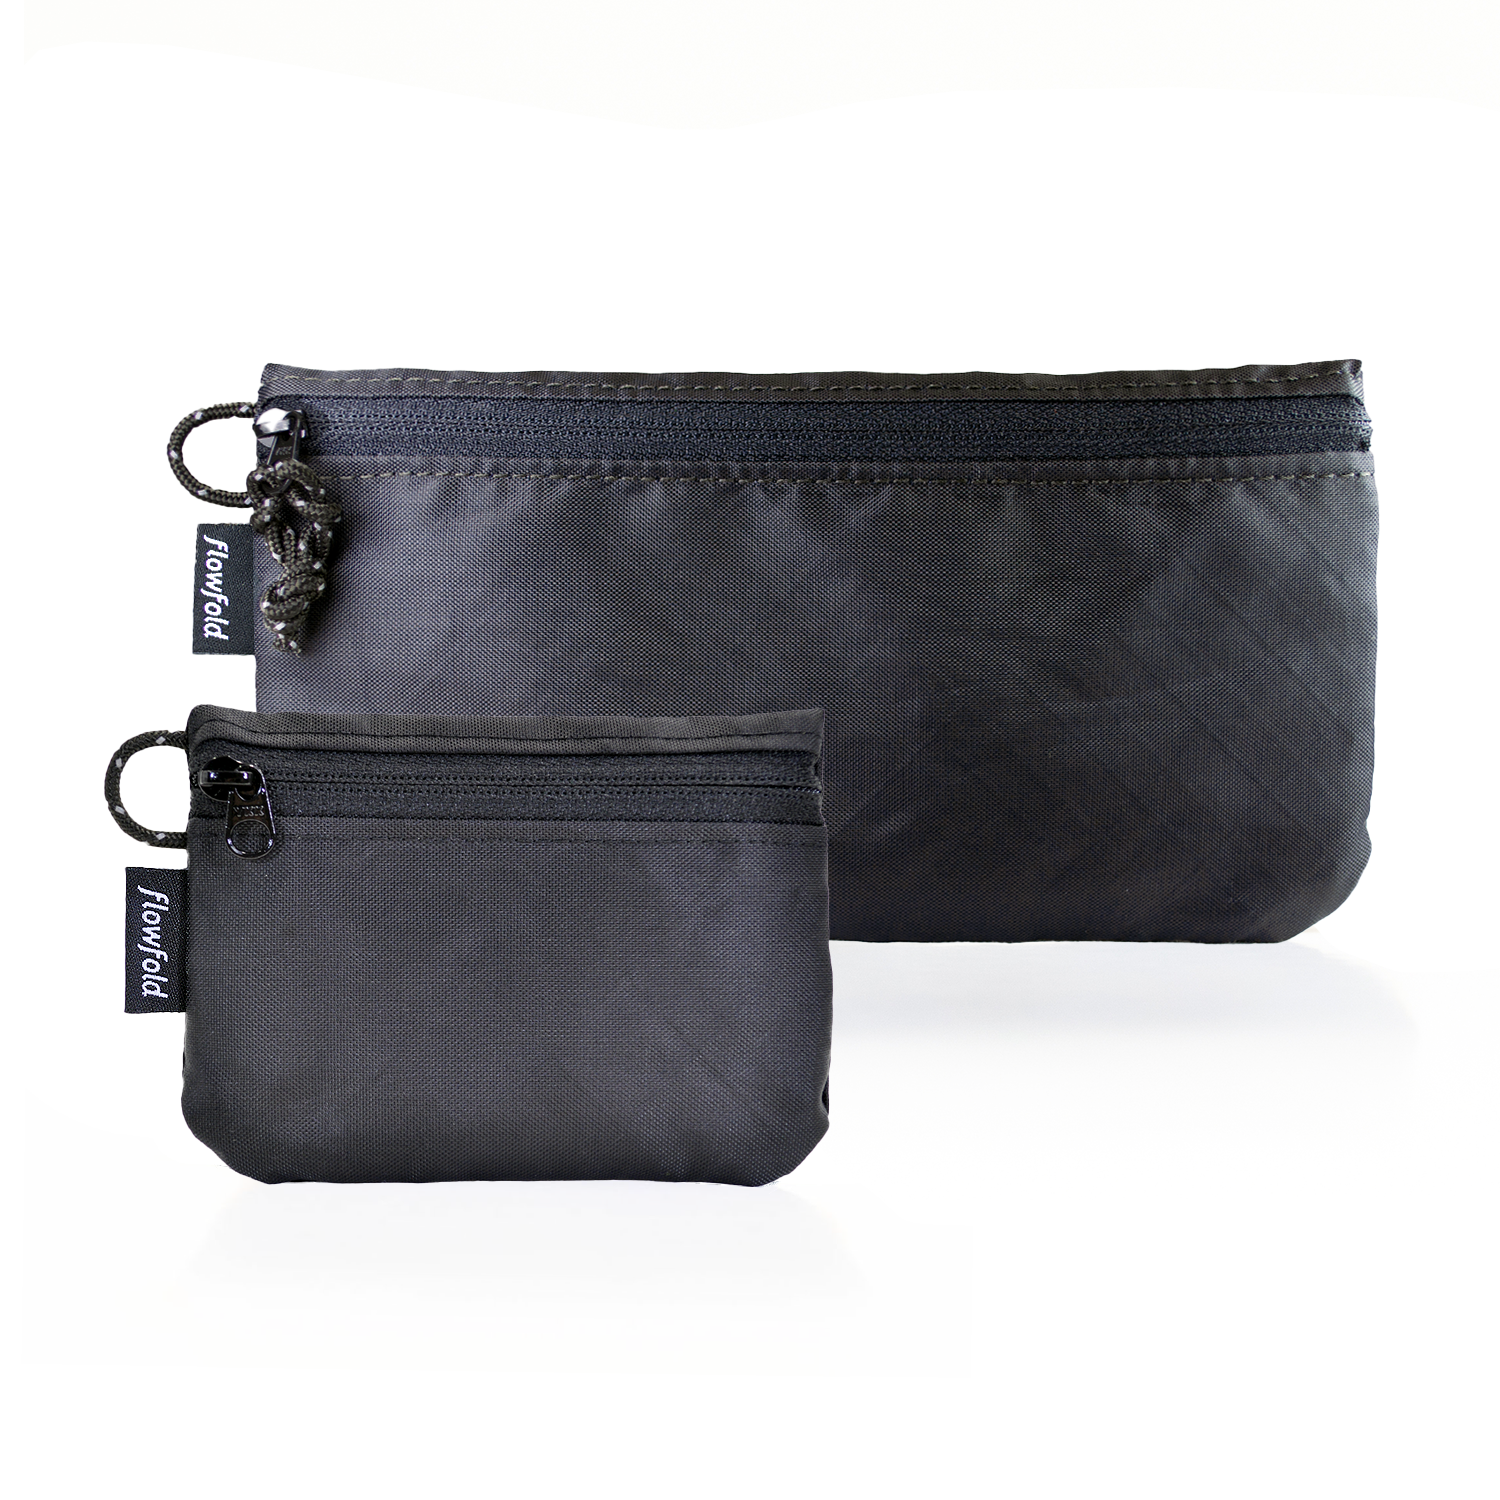 Flowfold Camden Kit: Creator Large Zippered Women's Wallet For Cash, Cards, and Phone + Essentialist Zipper Pouch, Recycled Black